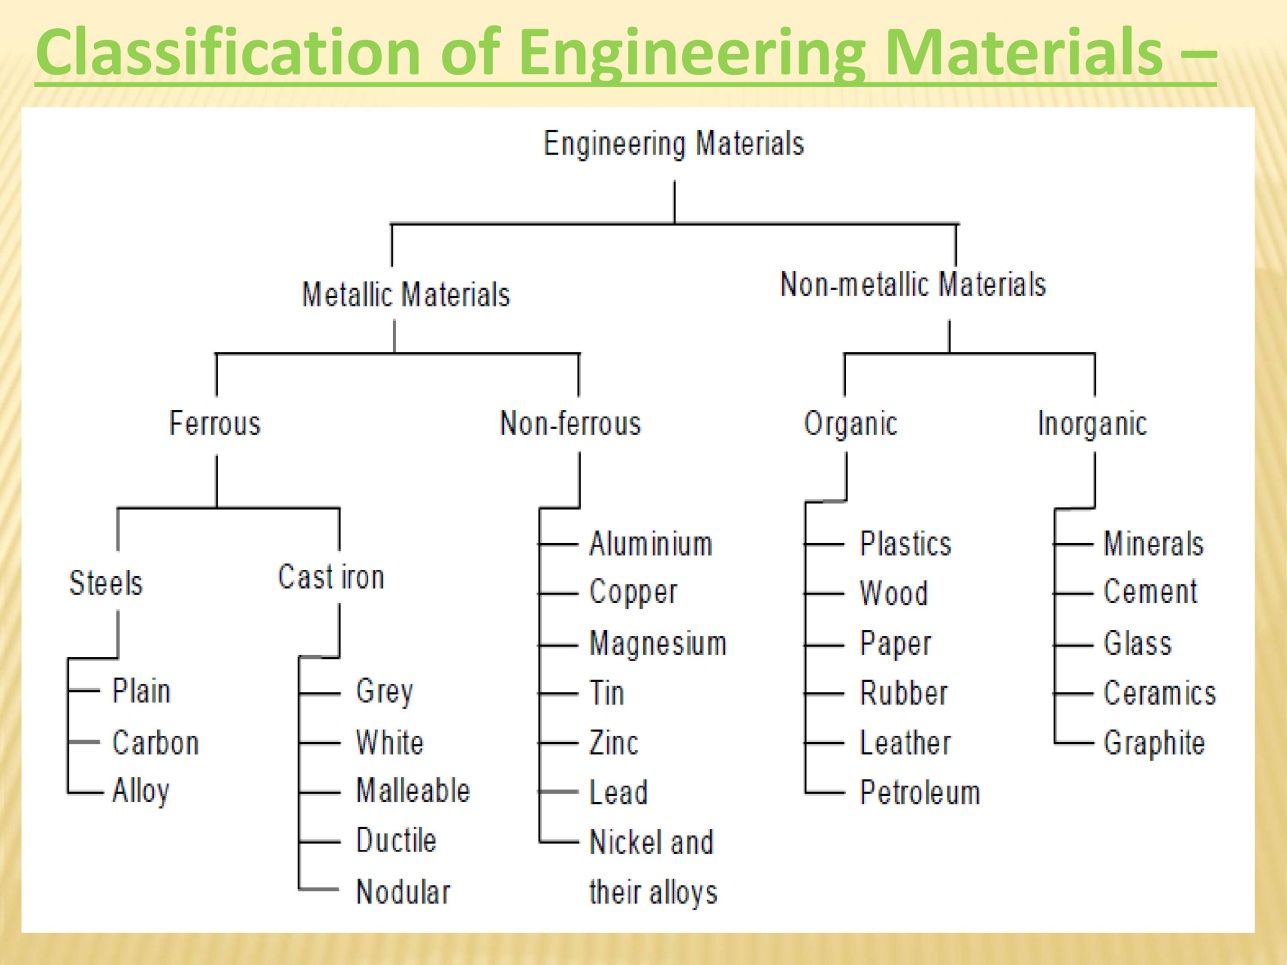 Classification Of Engineering Materials Part 1 - PowerPoint Slides